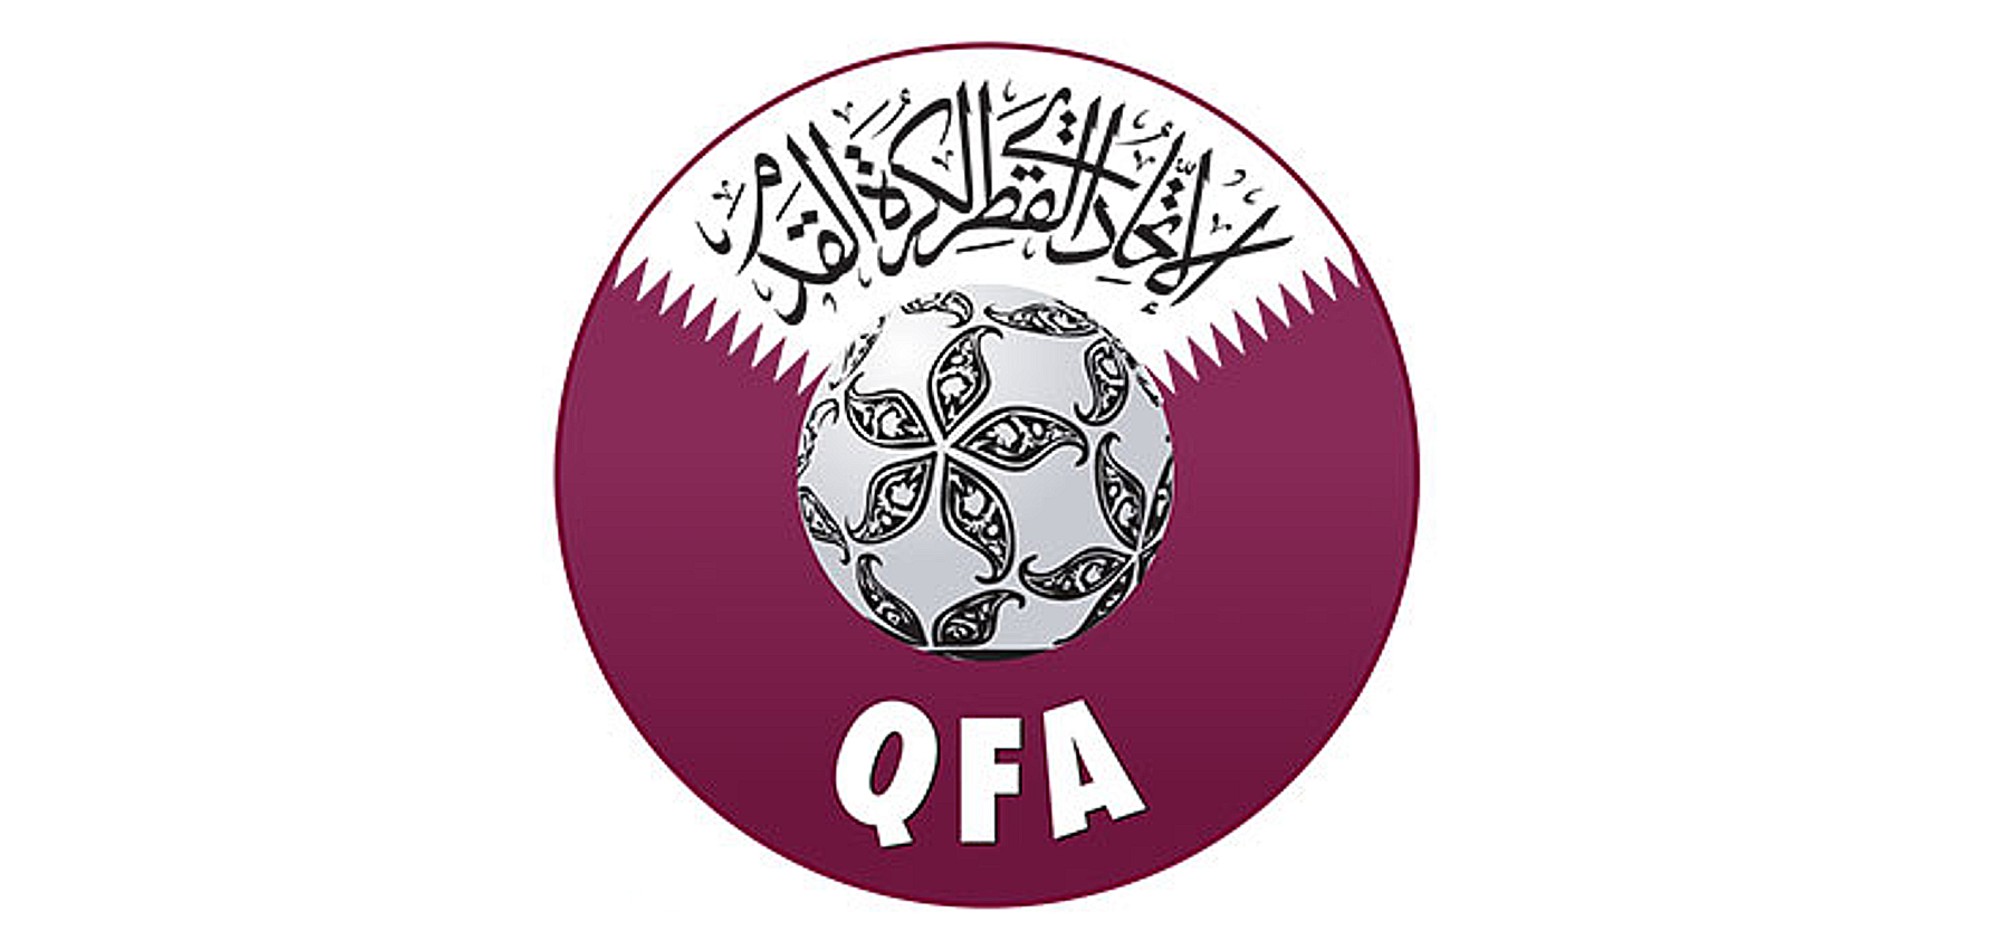 Qatar Ranked 58th on FIFA Monthly Rankings